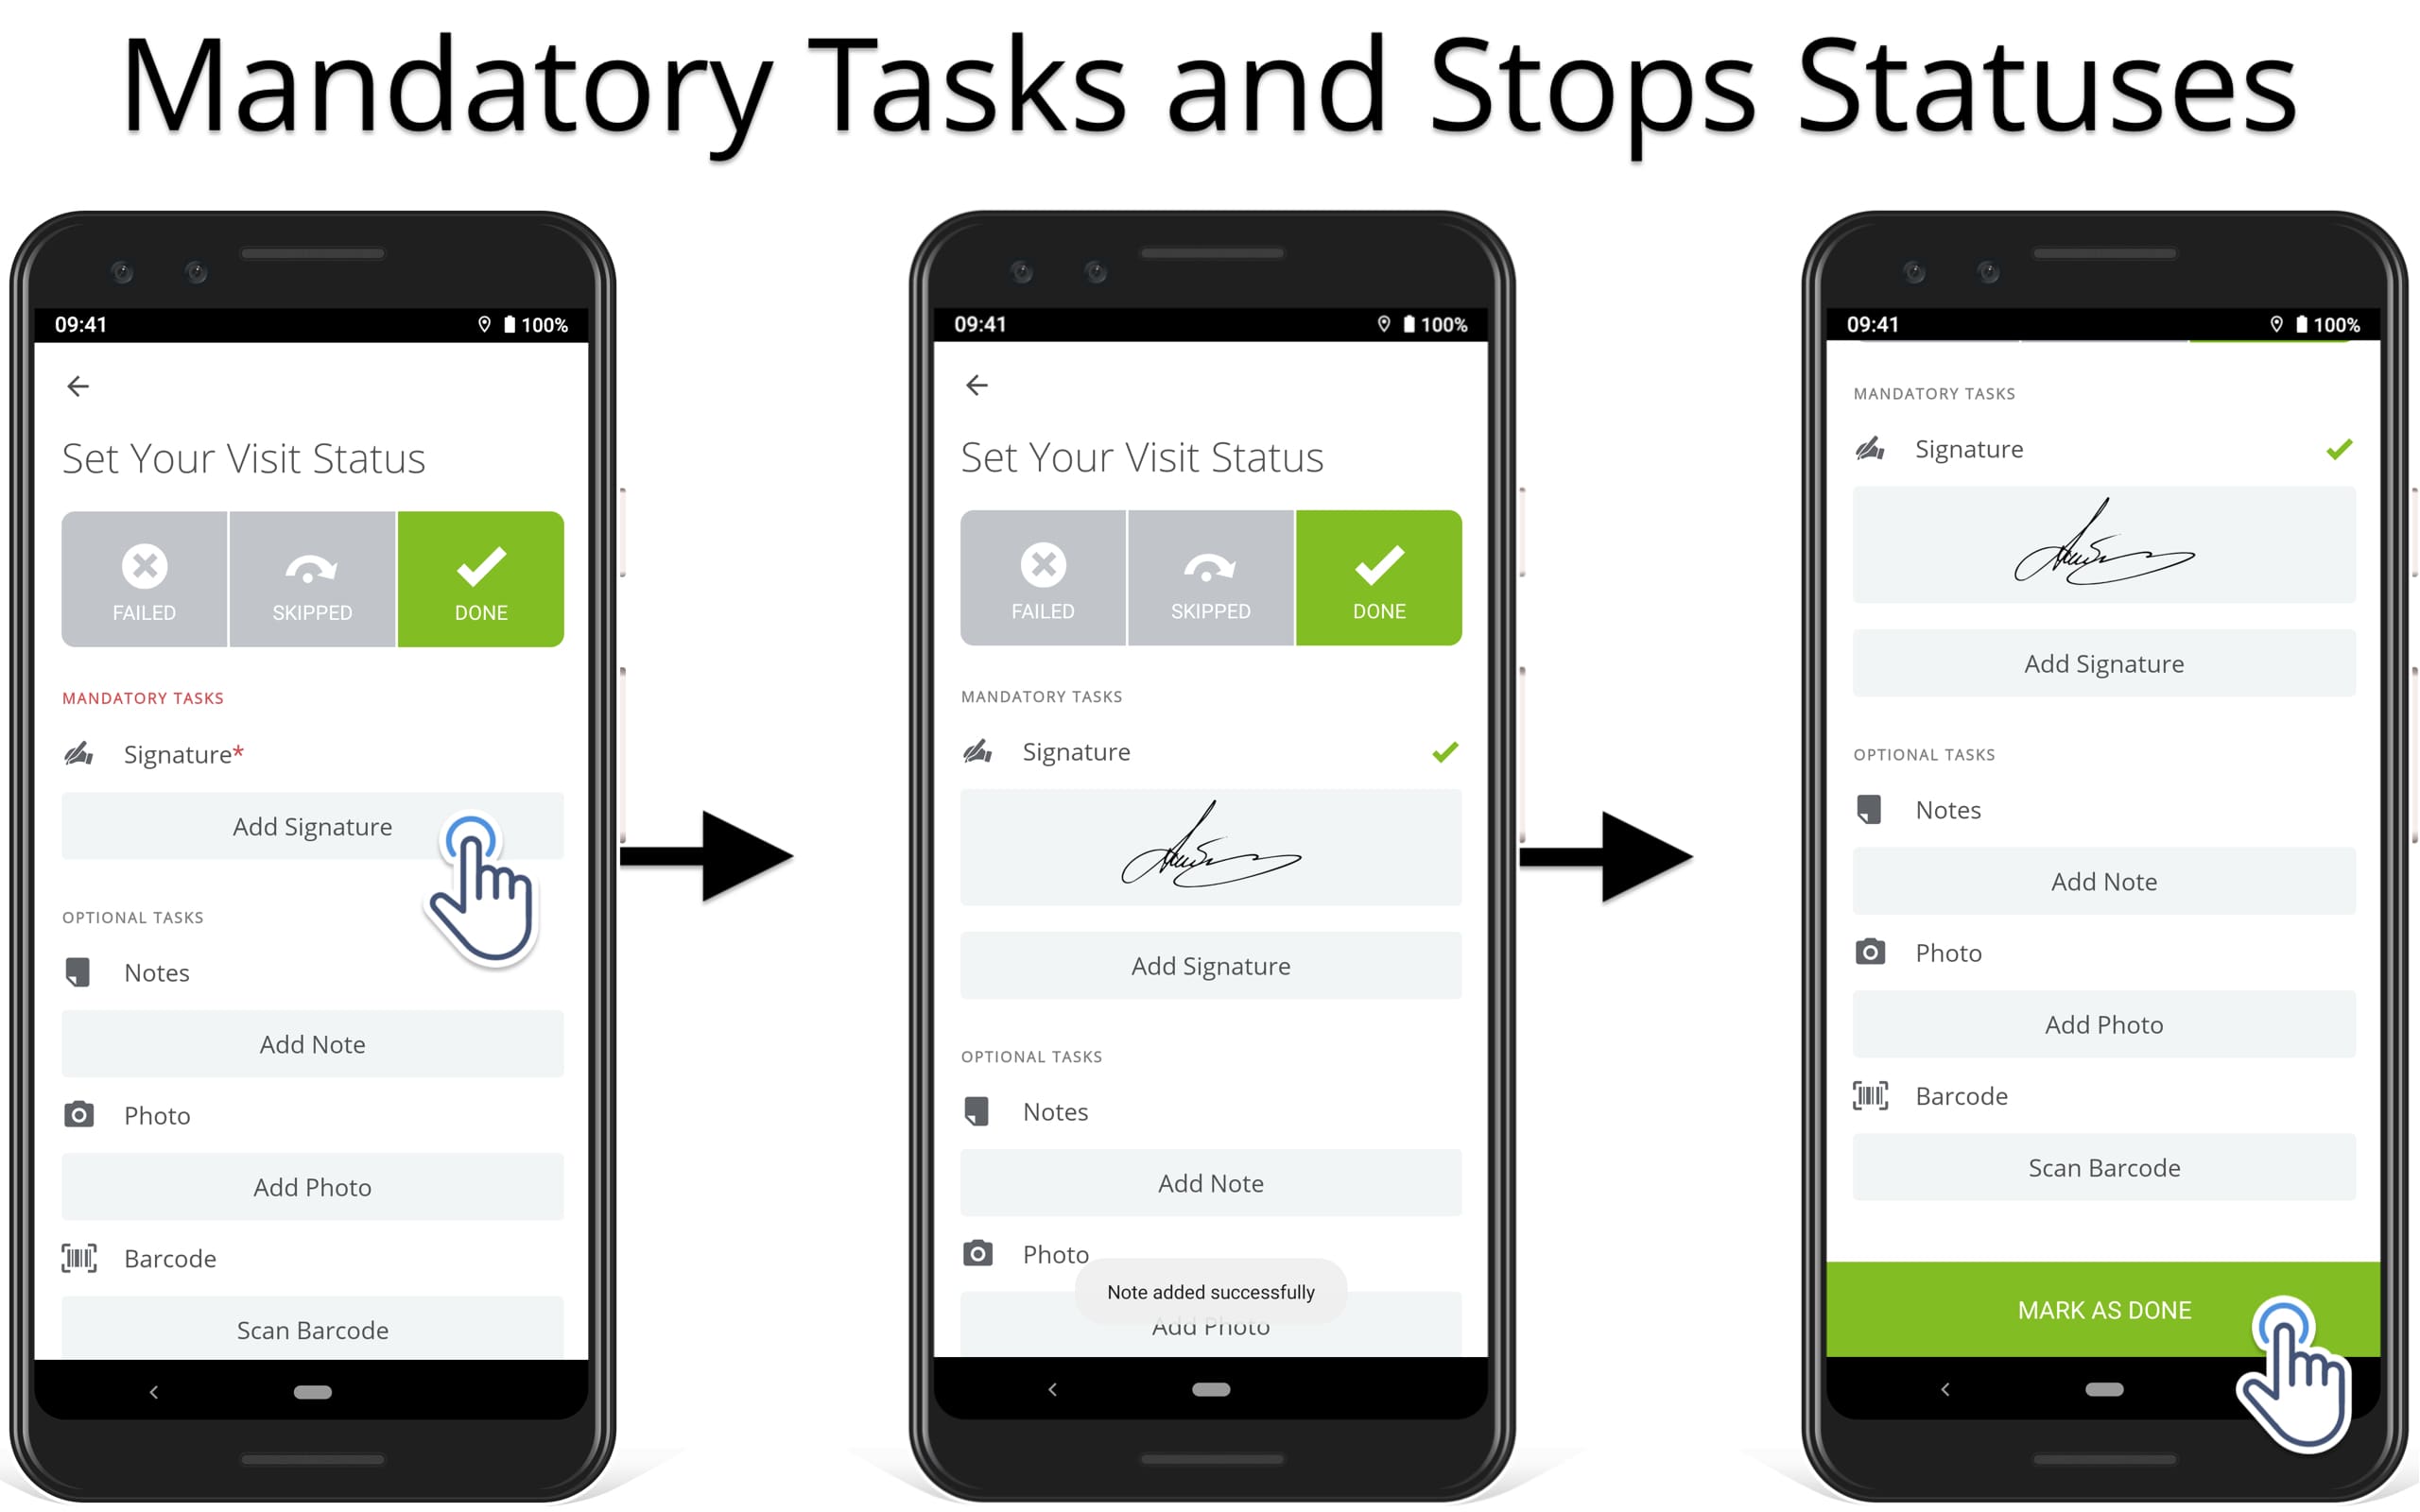 Use mandatory tasks and route stops statuses on the Android Route Planner app.